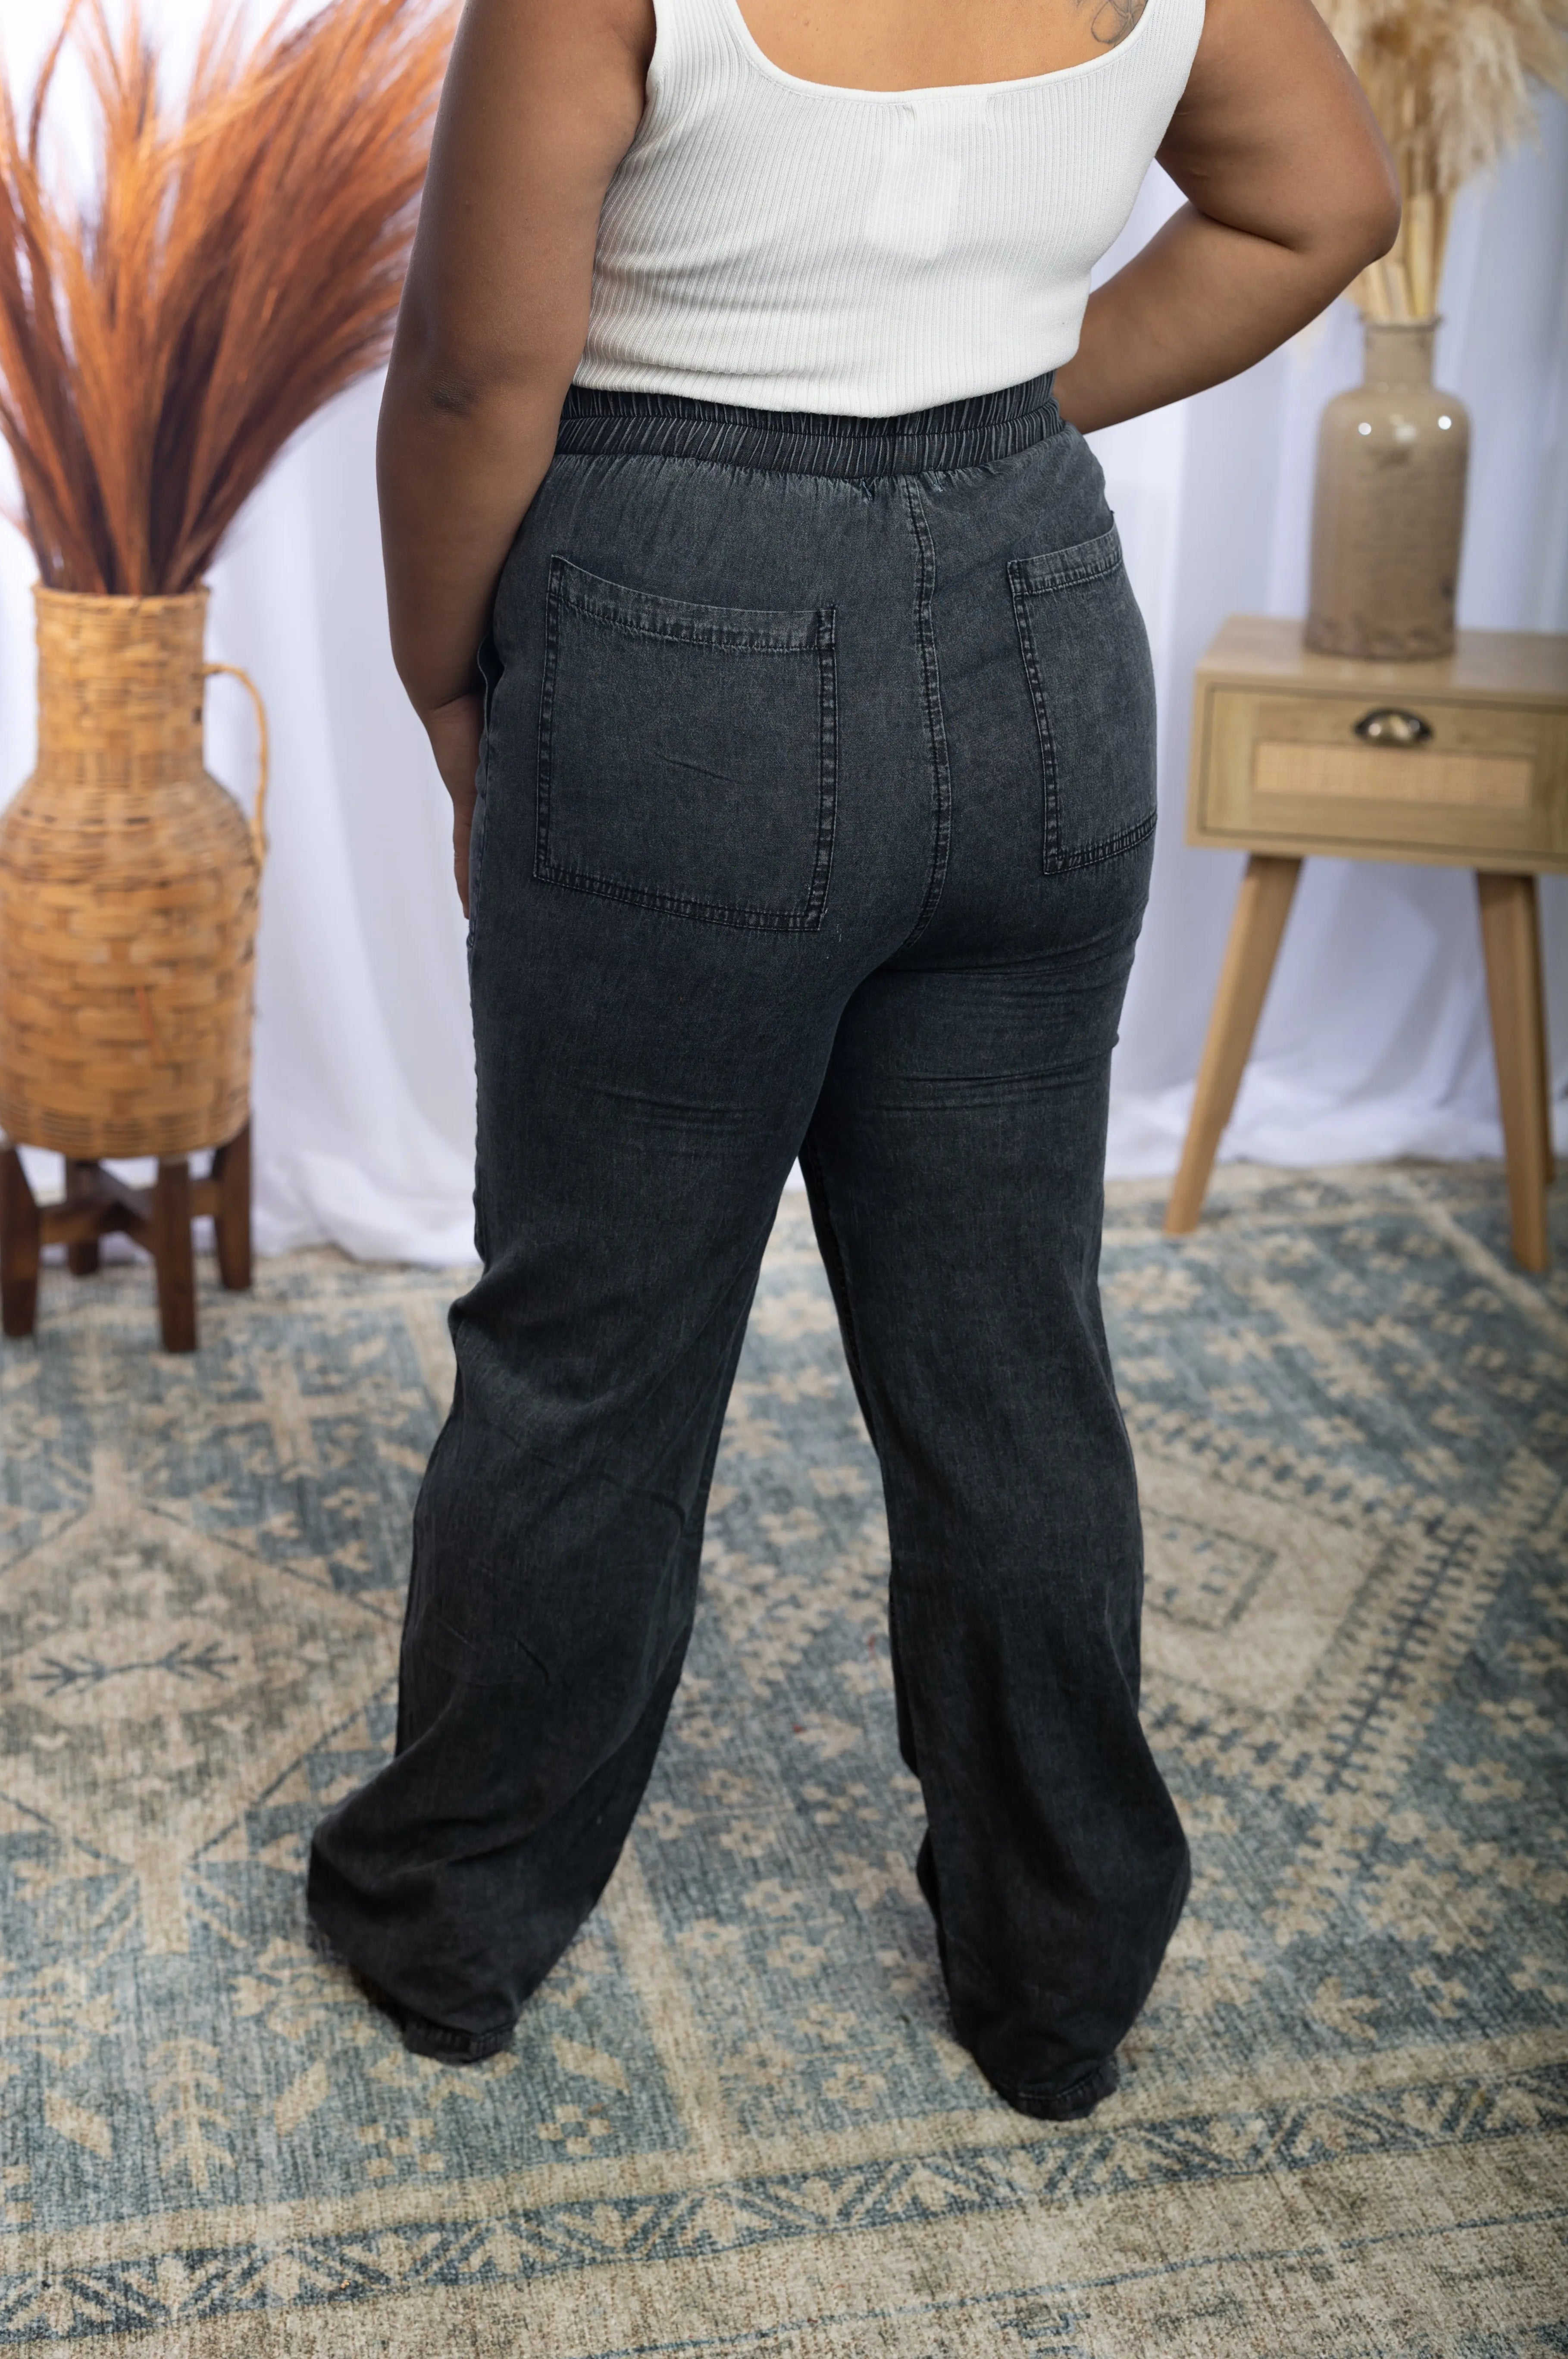 Relax & Unwind - Chambray Pants Boutique Simplified